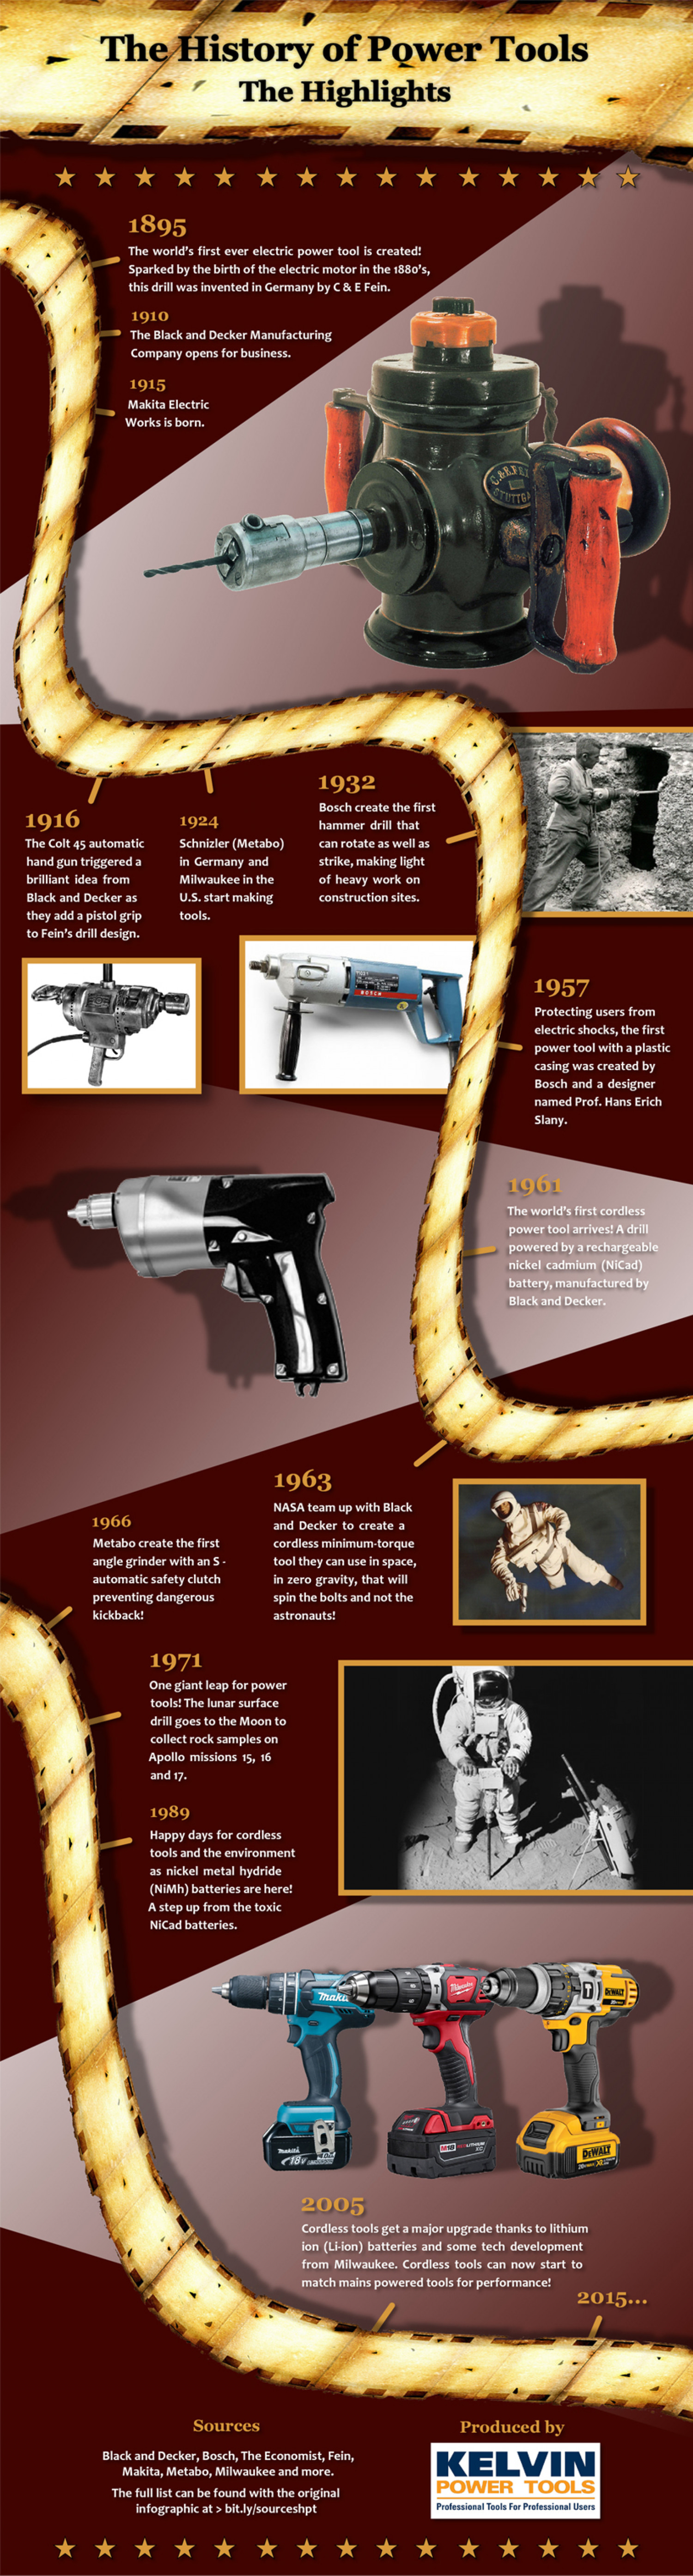 The History of Power Tools: The Highlights Infographic